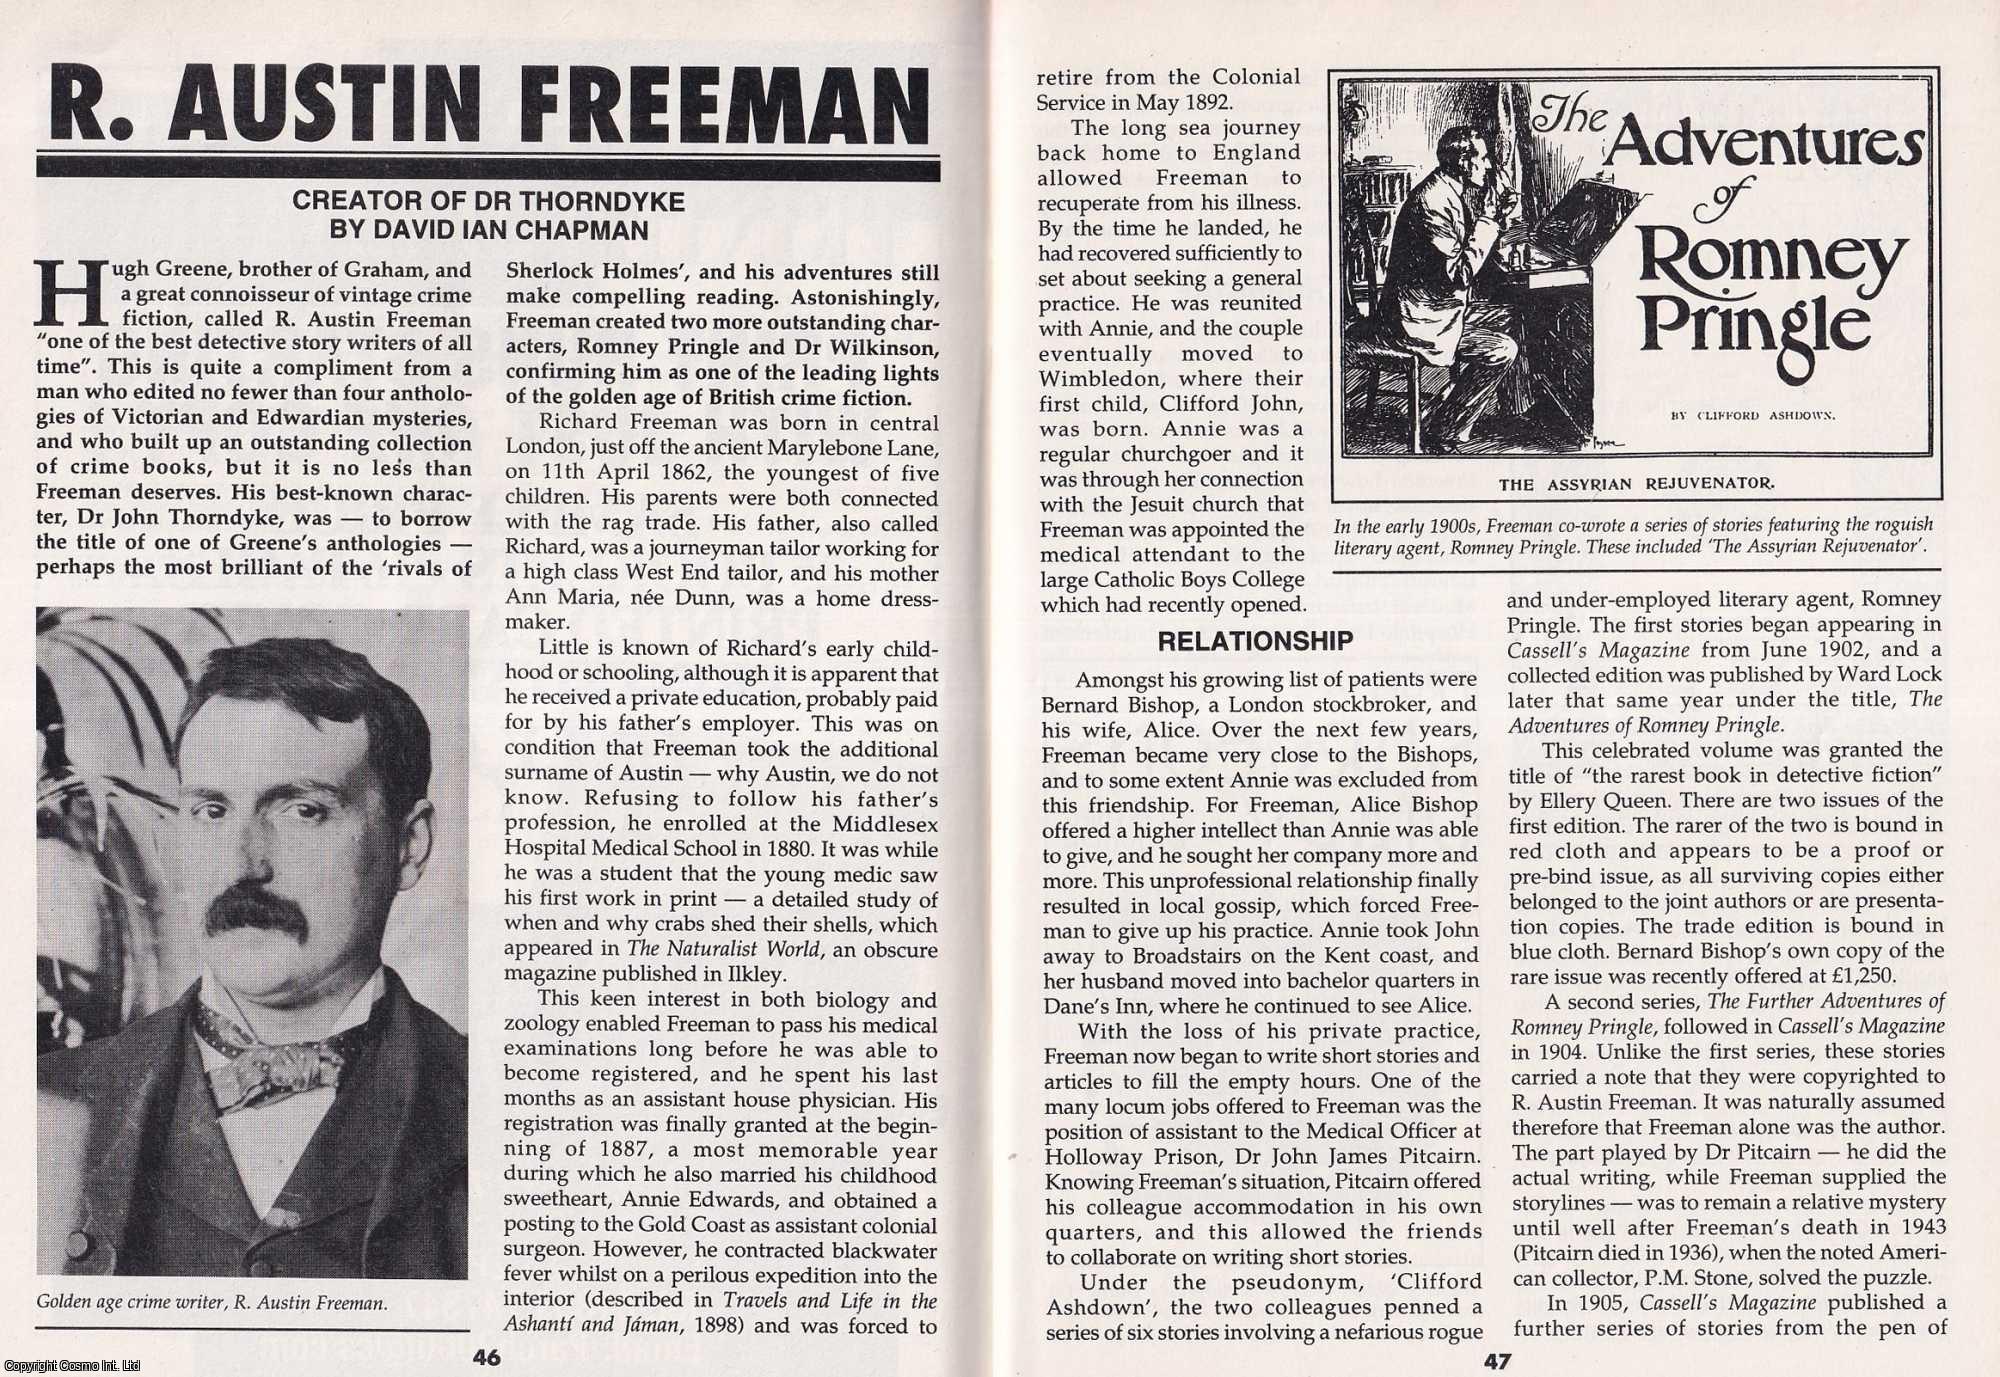 David Ian Chapman - Richard Austin Freeman (British writer). This is an original article separated from an issue of The Book & Magazine Collector publication.